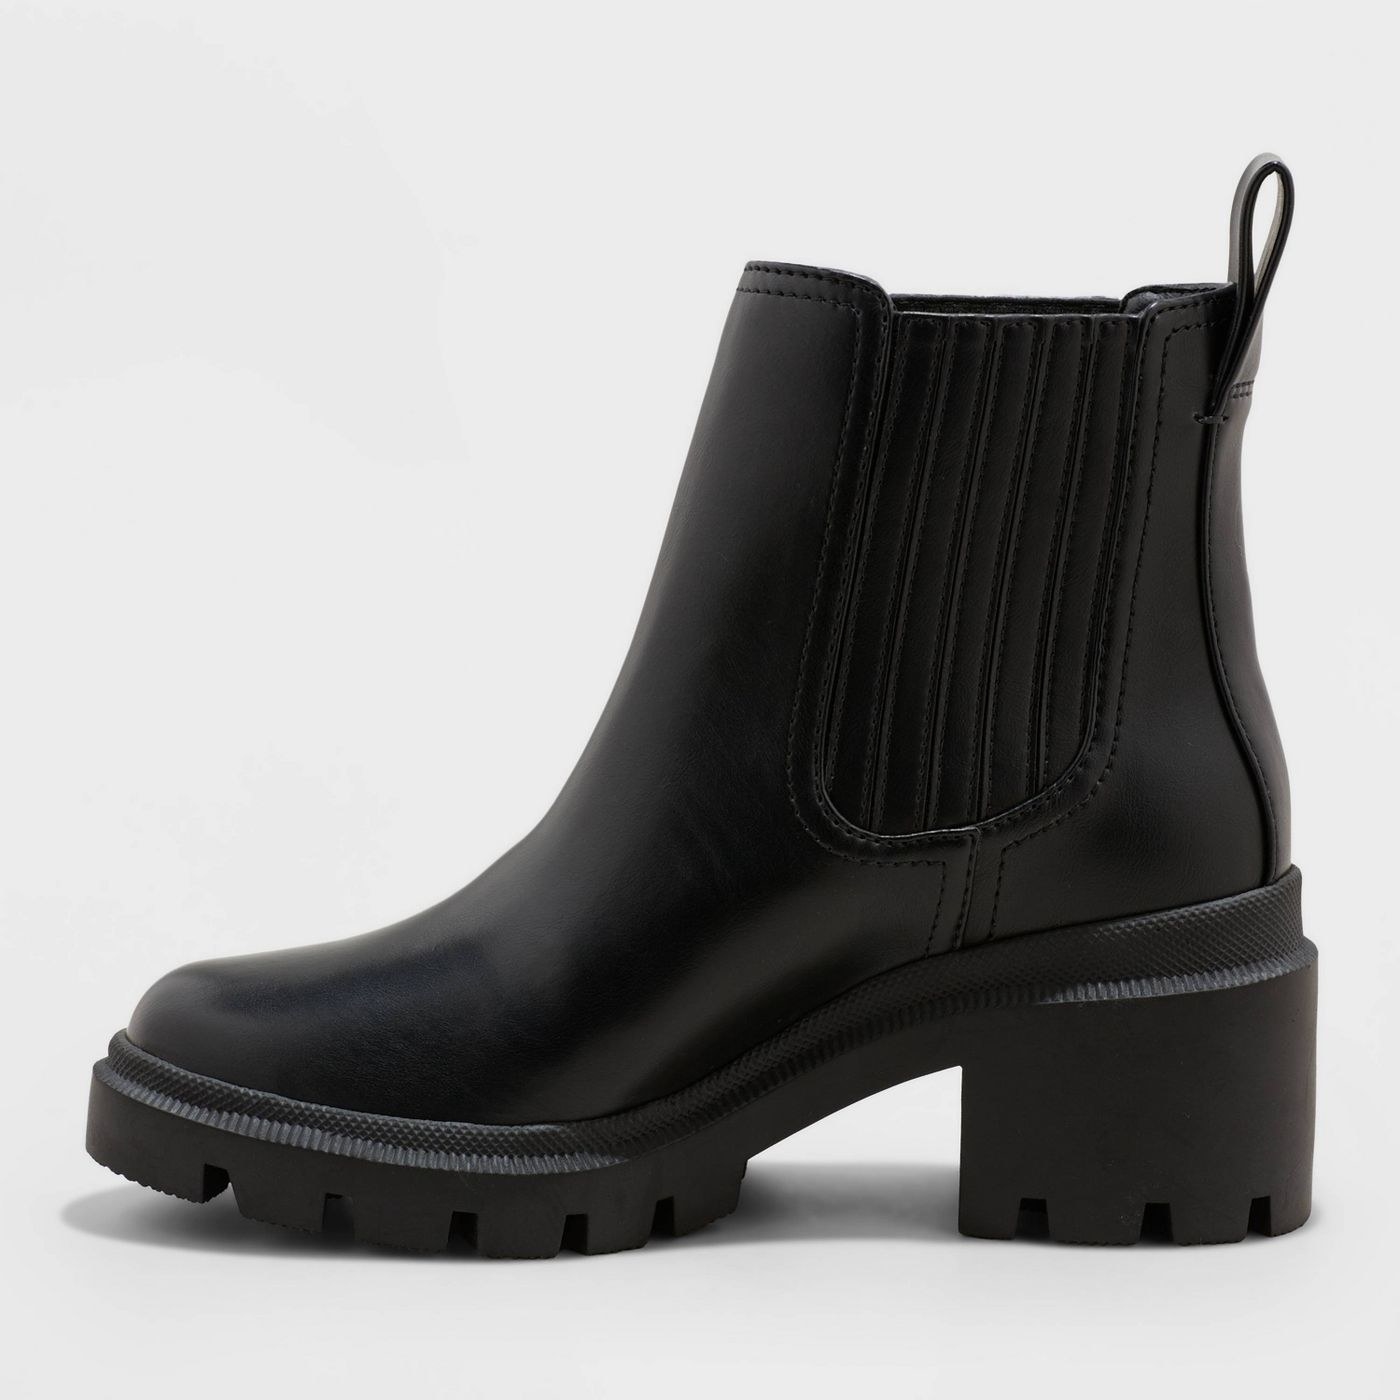 A black heeled chelsea boot